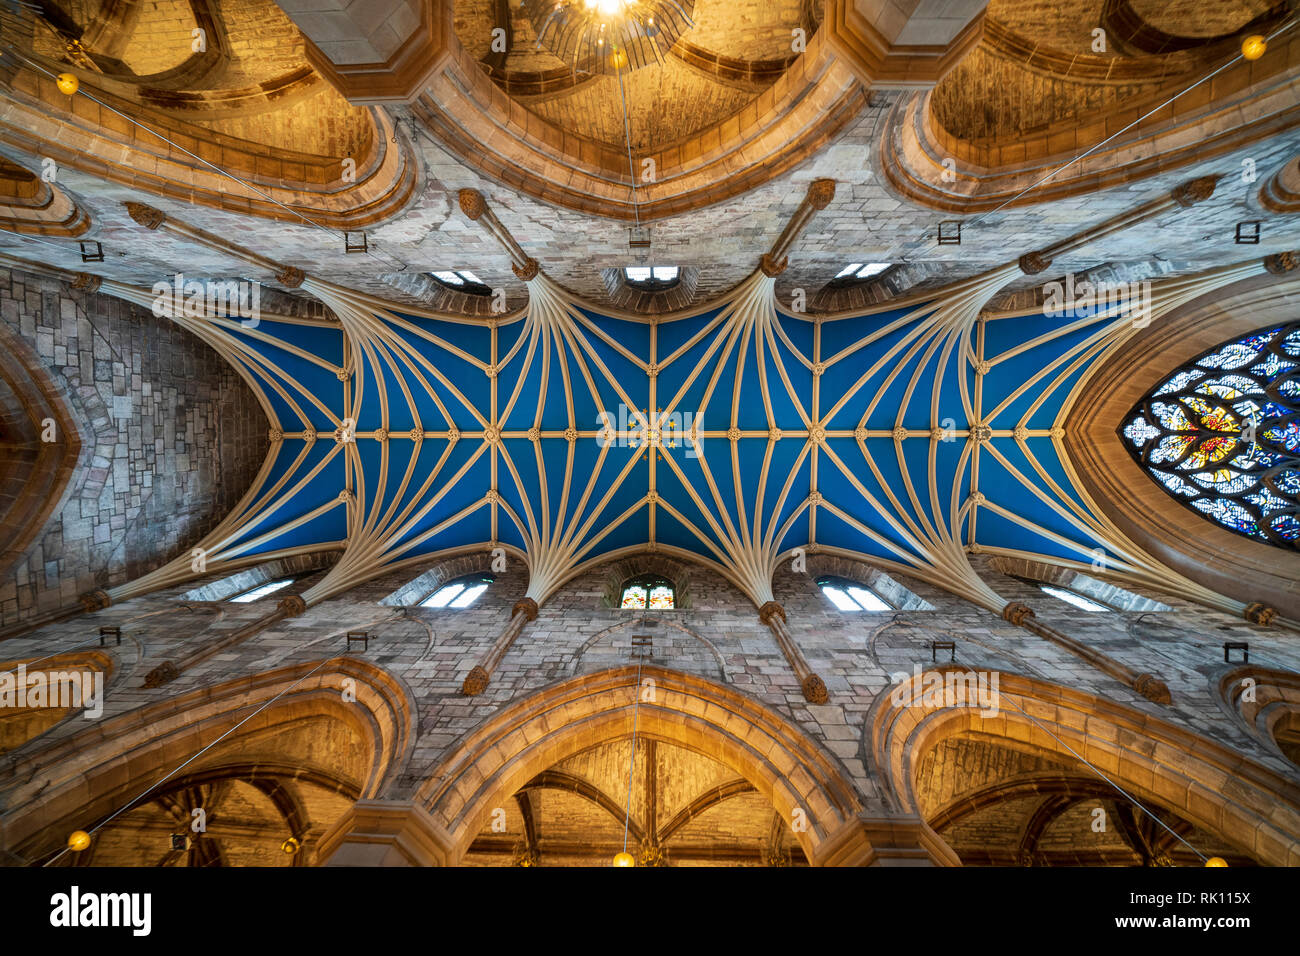 View of ornate roof ceiling of St Giles Cathedral in Edinburgh Old Town, Scotland, UK Stock Photo